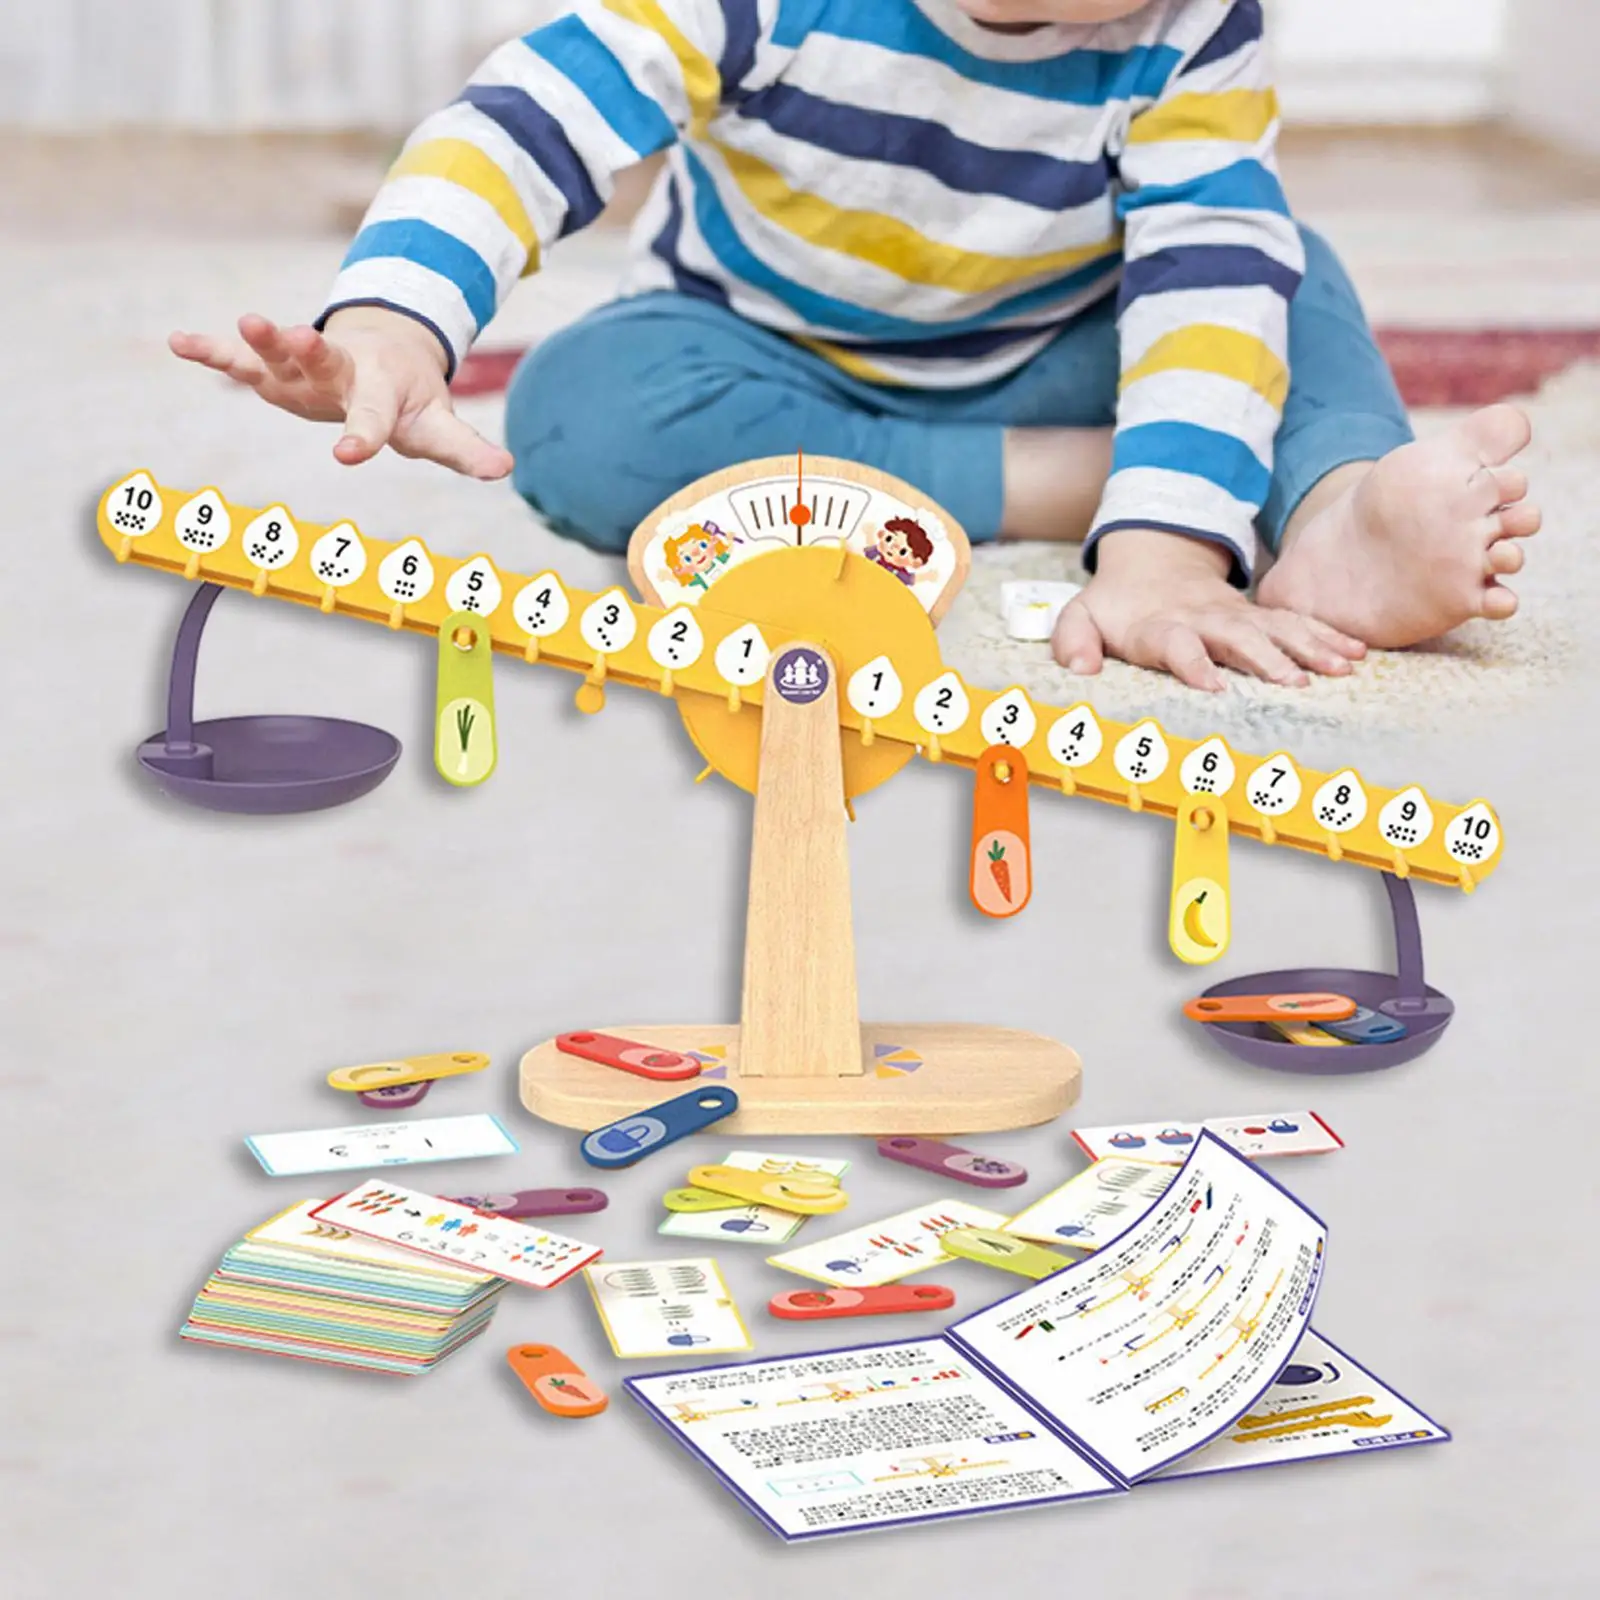 Kids Balance Scale Montessori Toy Boards Game, Educational for Early Math and Number Concepts for Kids Boy and Girl,